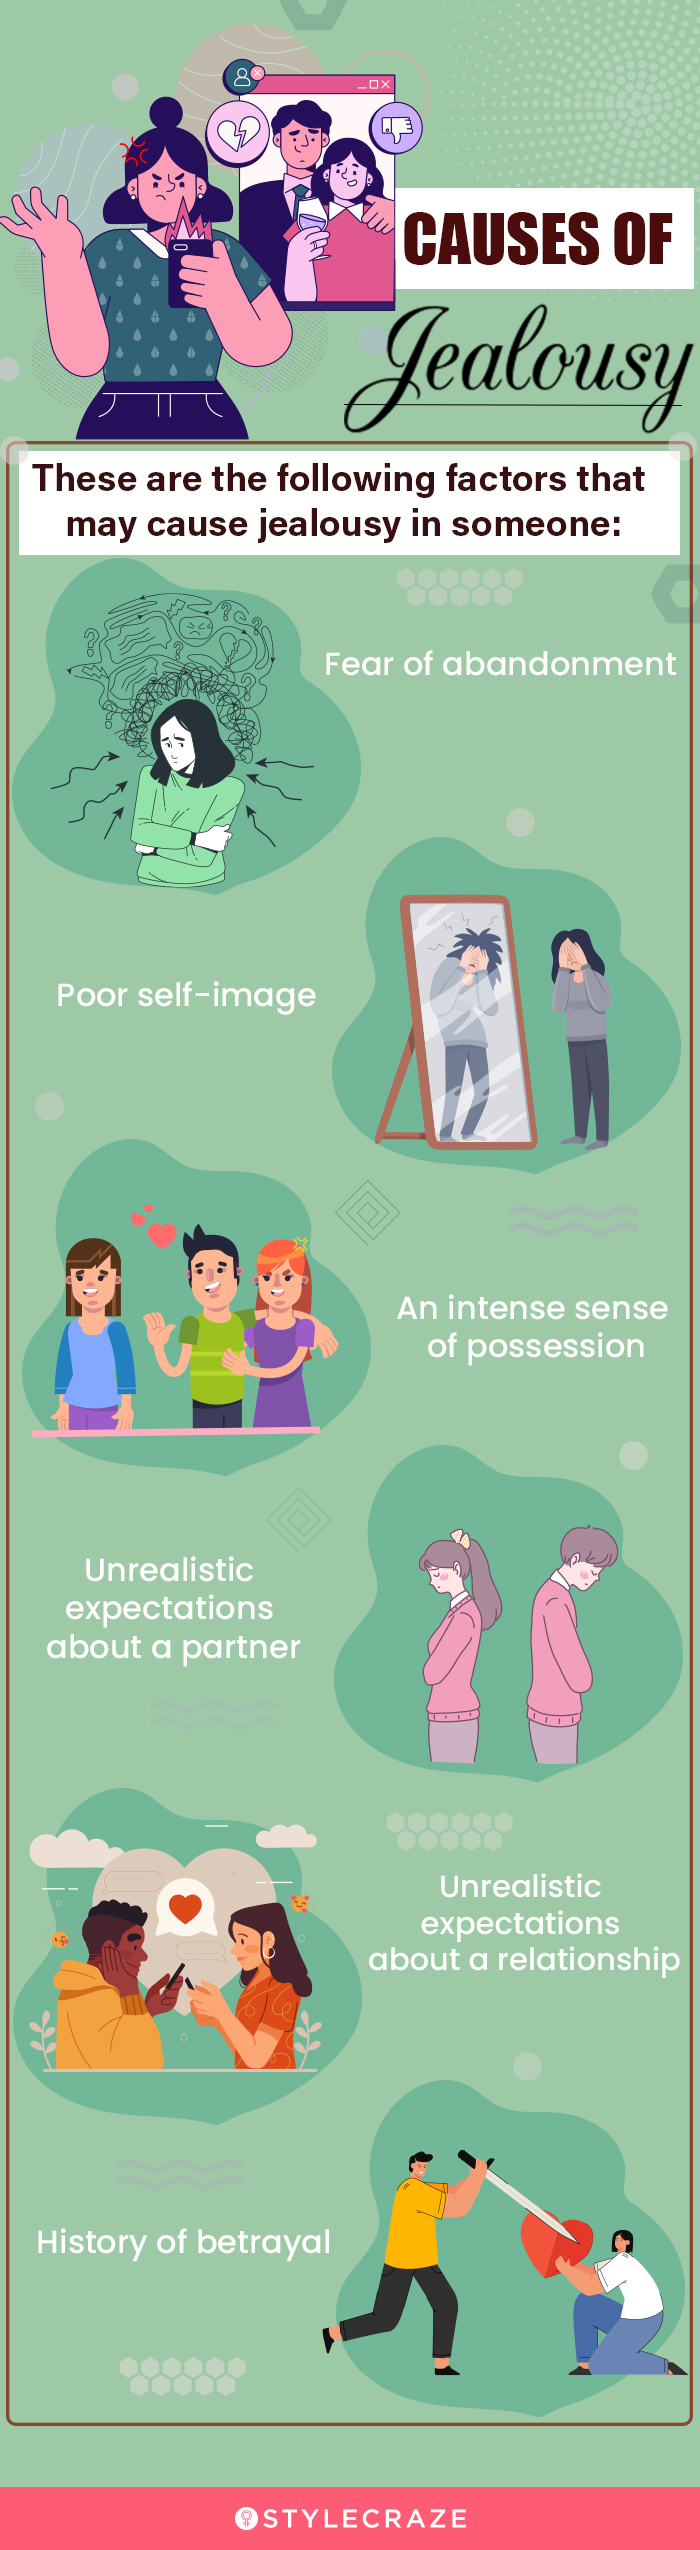 causes of jealousy [infographic]